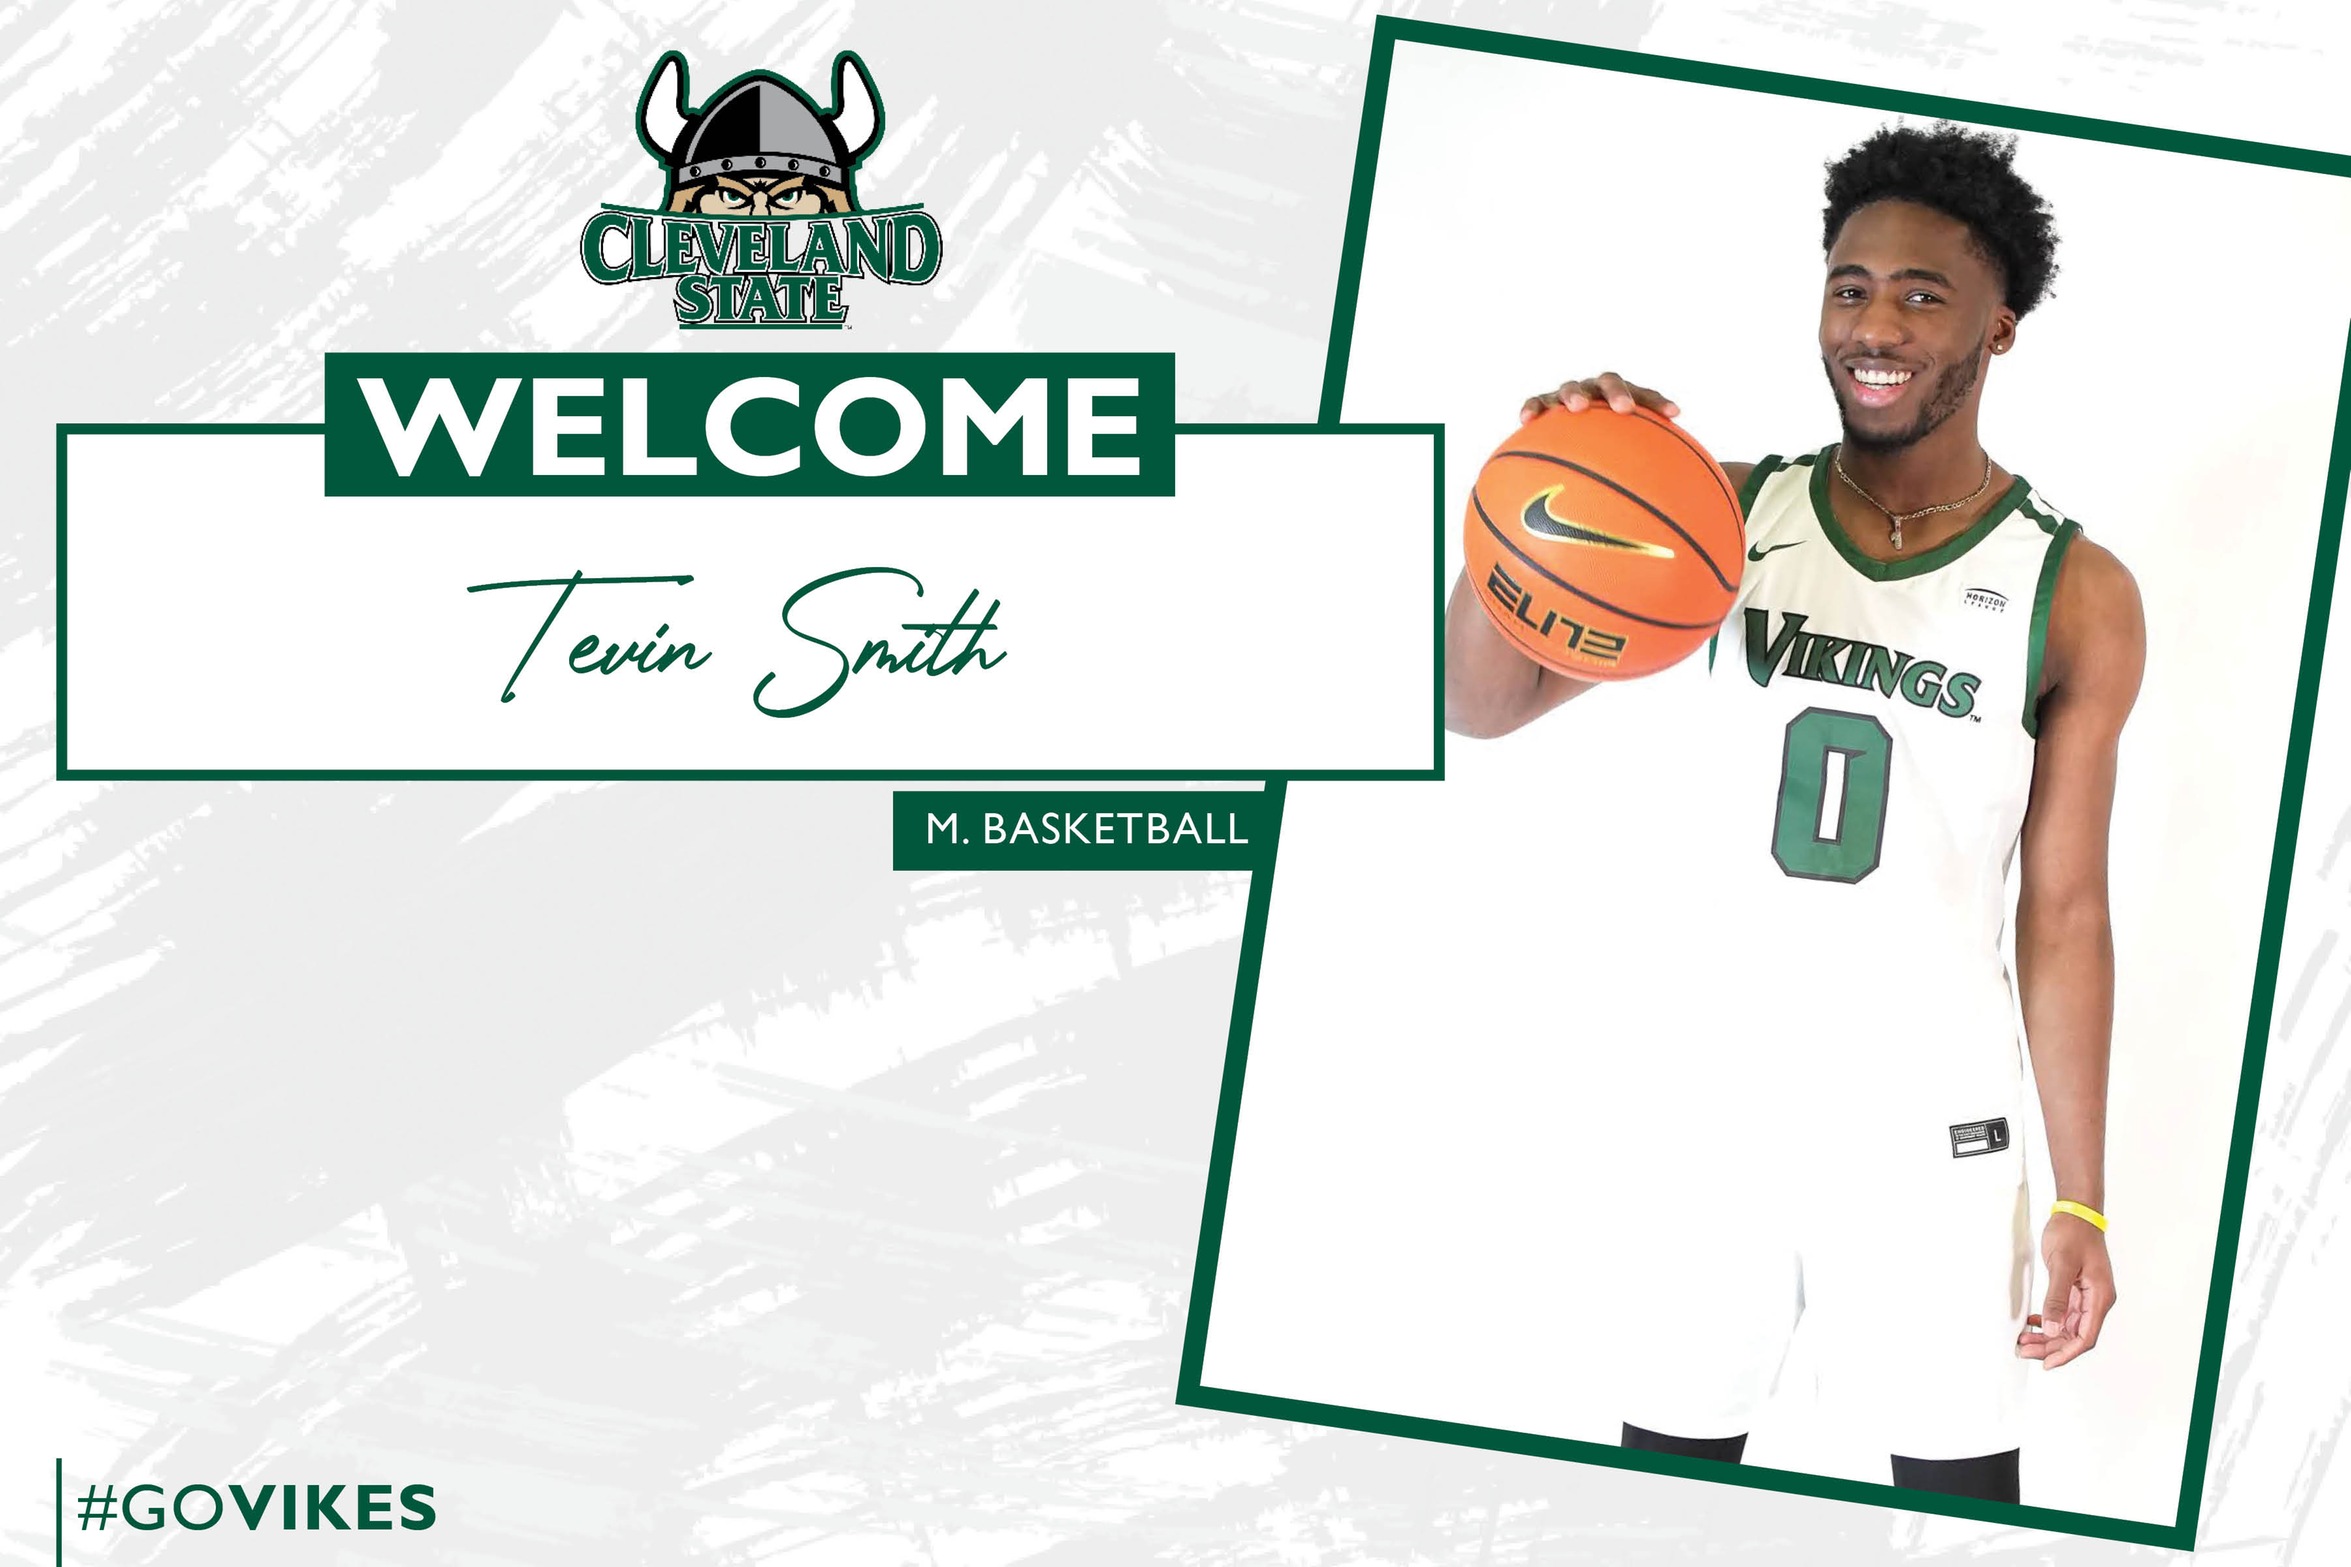 Cleveland State Men’s Basketball Signs Tevin Smith to Letter of Intent